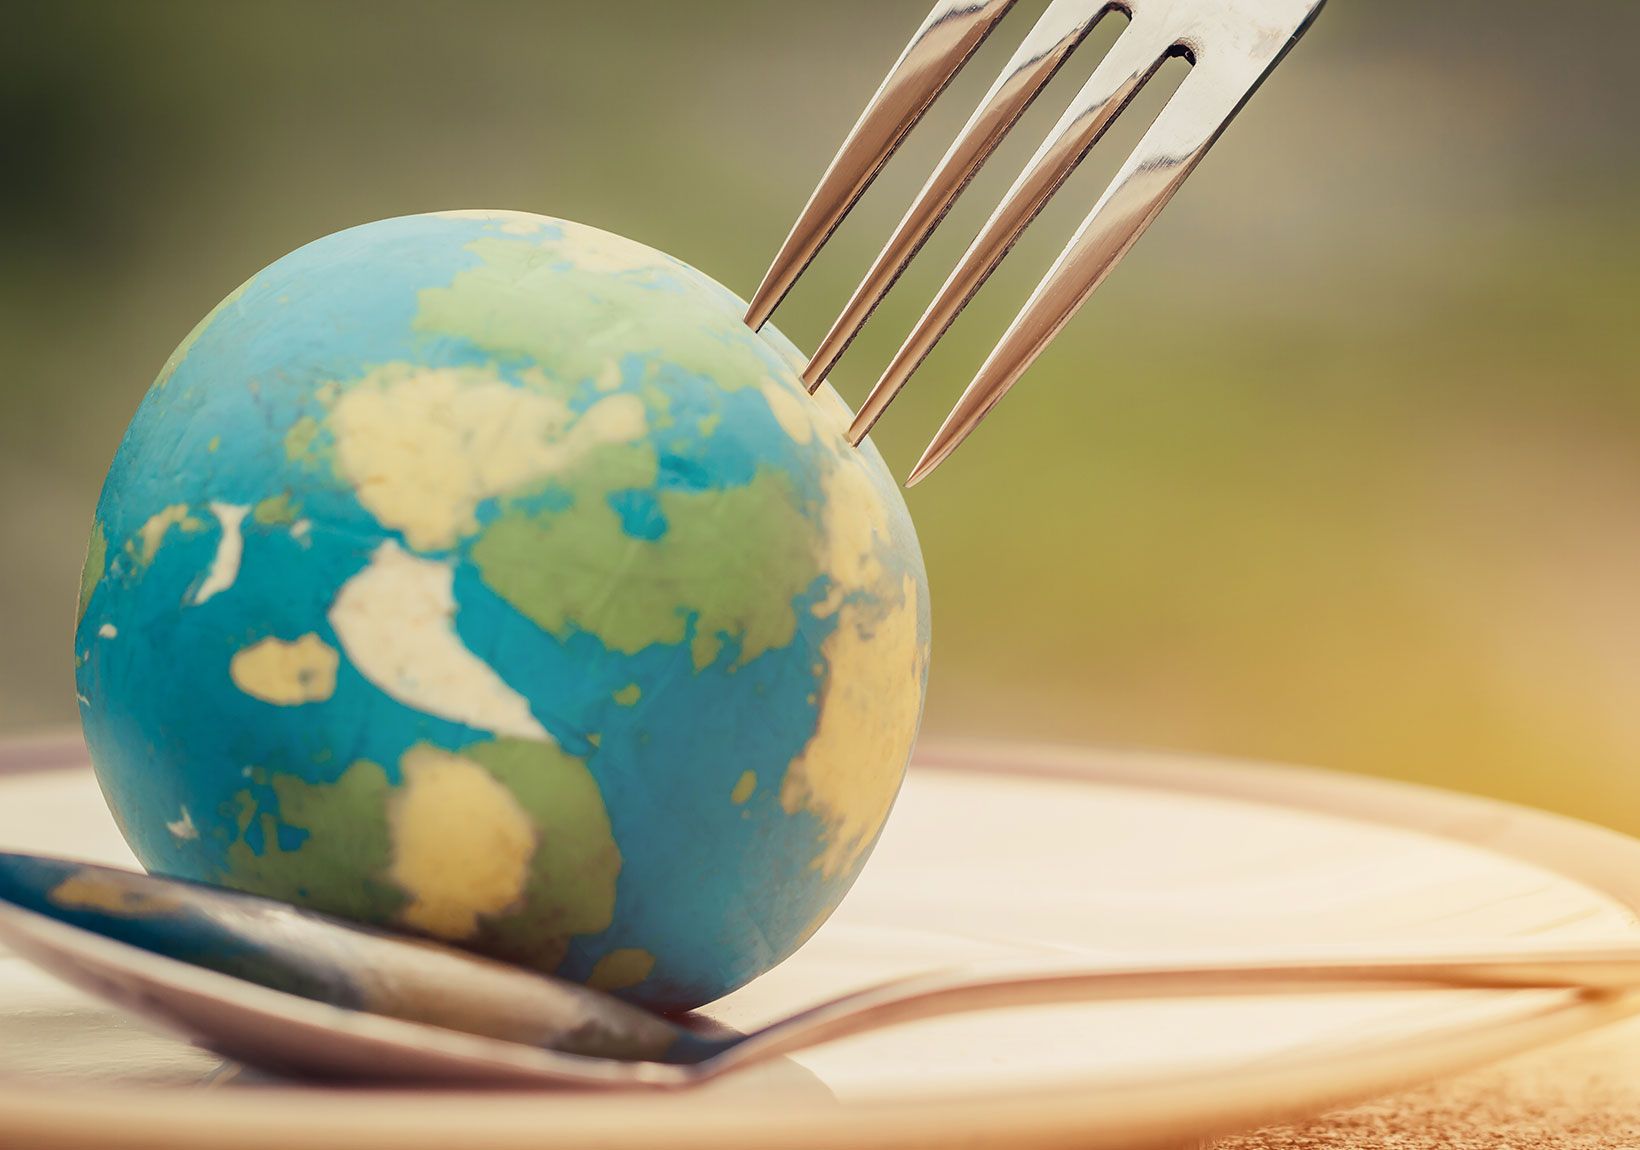 Food is the Source of the Environmental Catastrophe